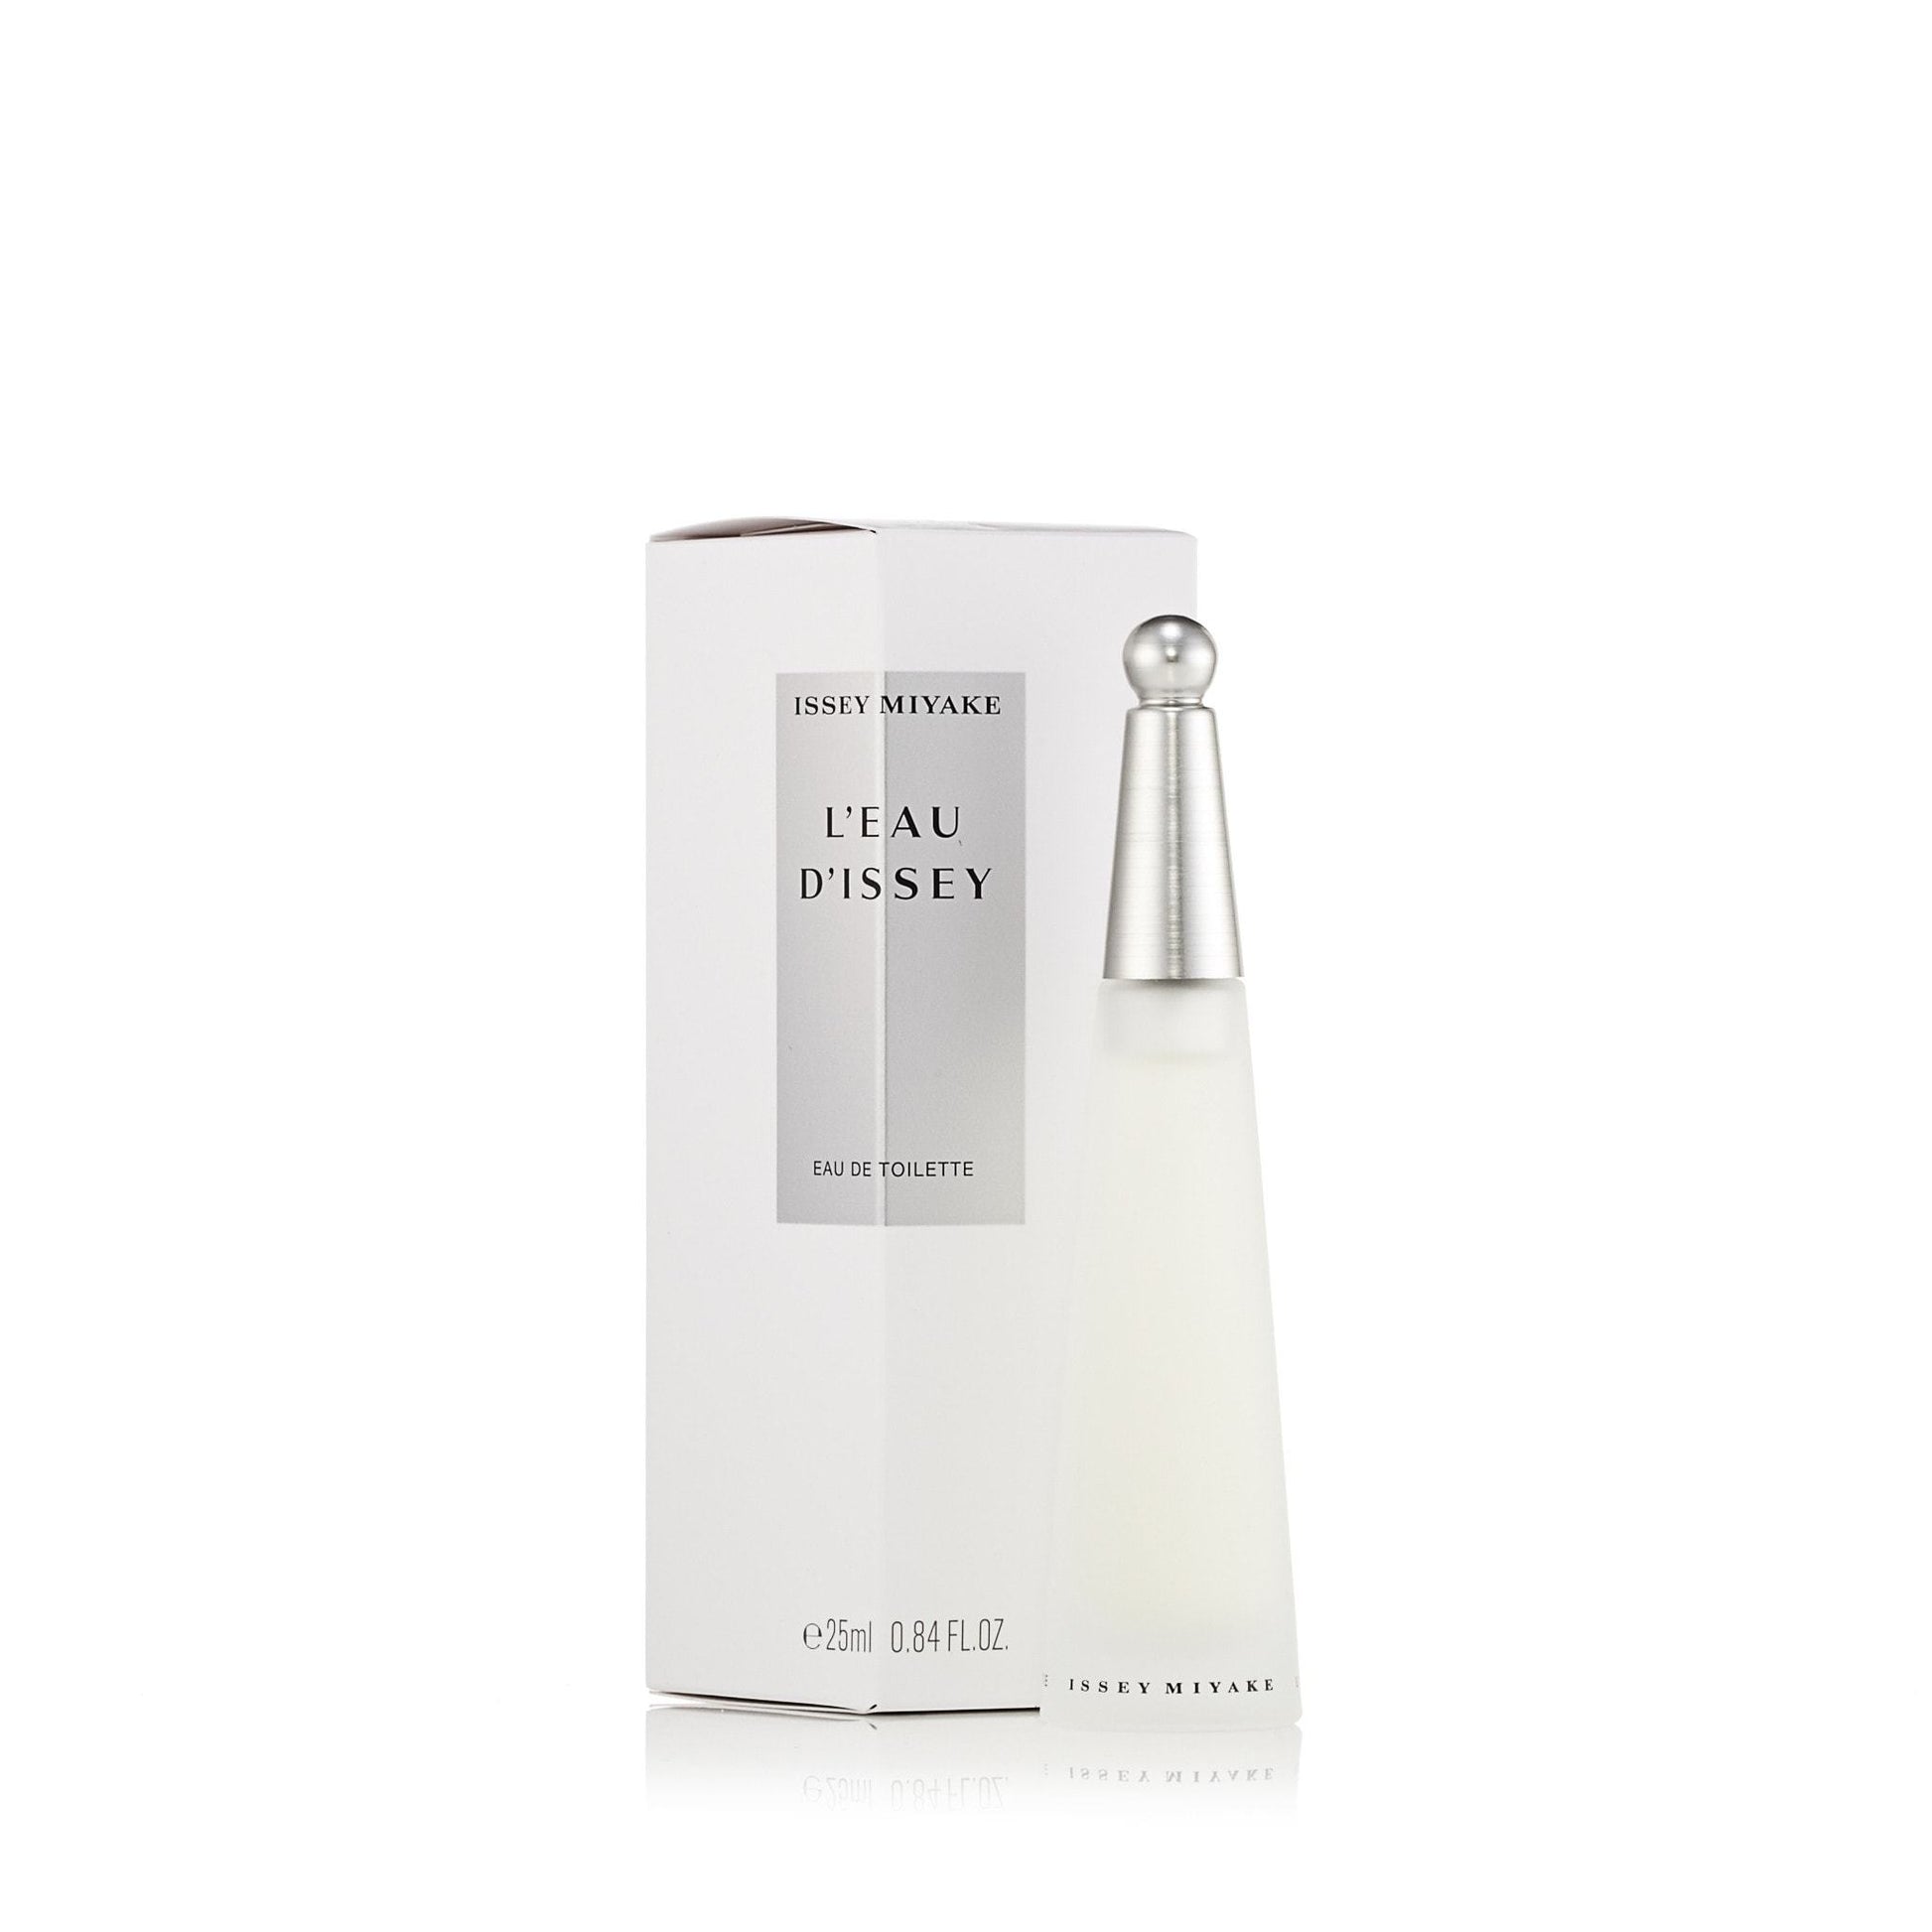 L'Eau Dissey Eau de Toilette Spray for Women by Issey Miyake, Product image 6